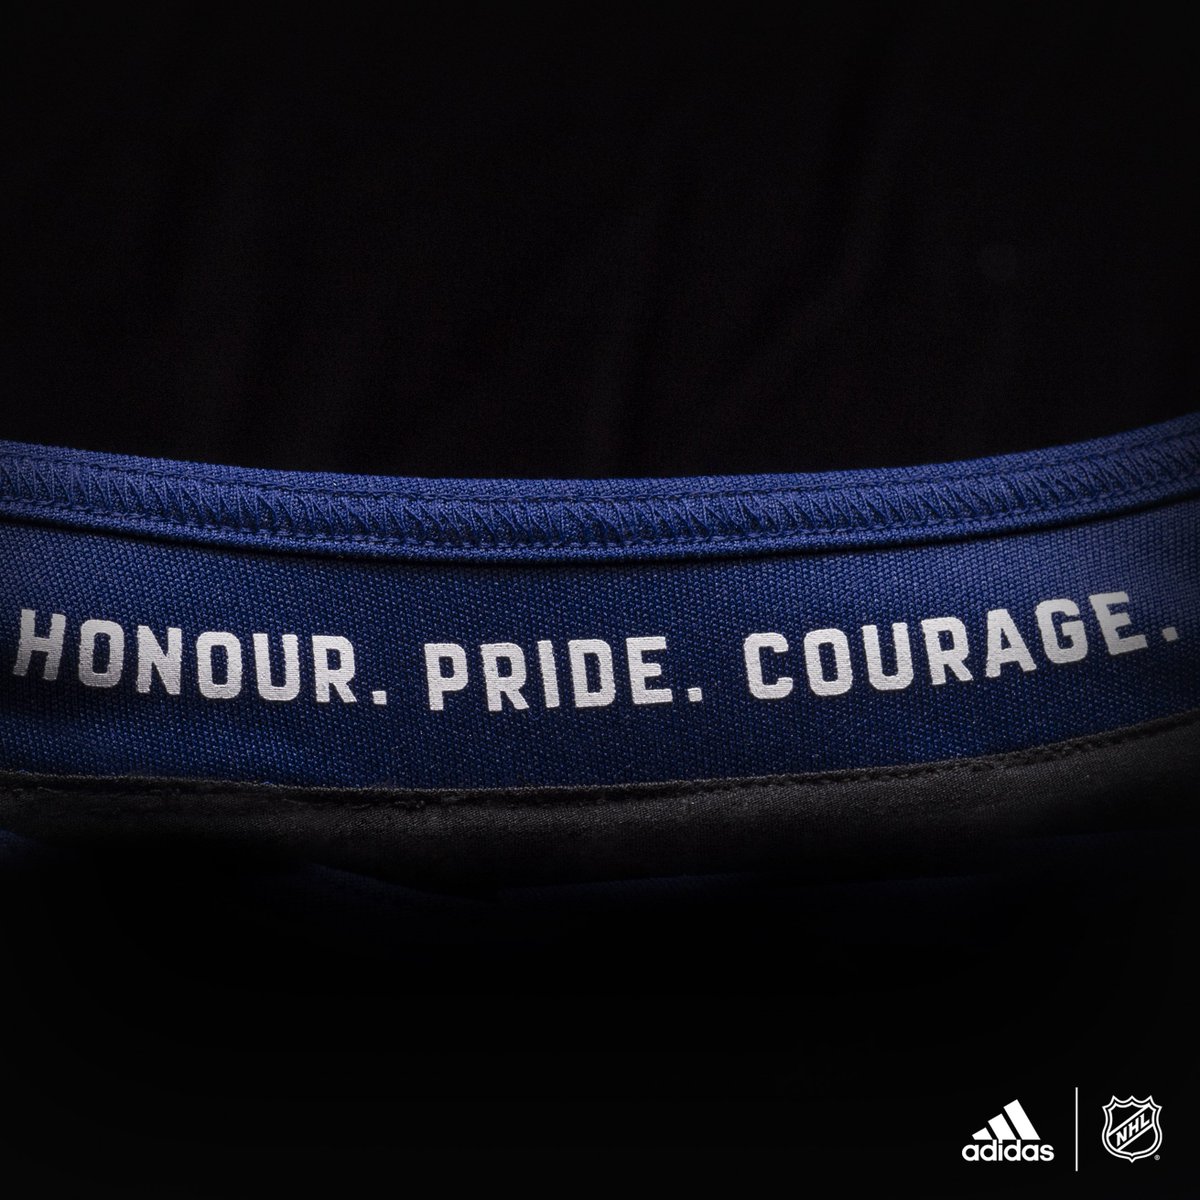 What we stand for.   #FormTheFuture @adidashockey https://t.co/USQAprXlqP